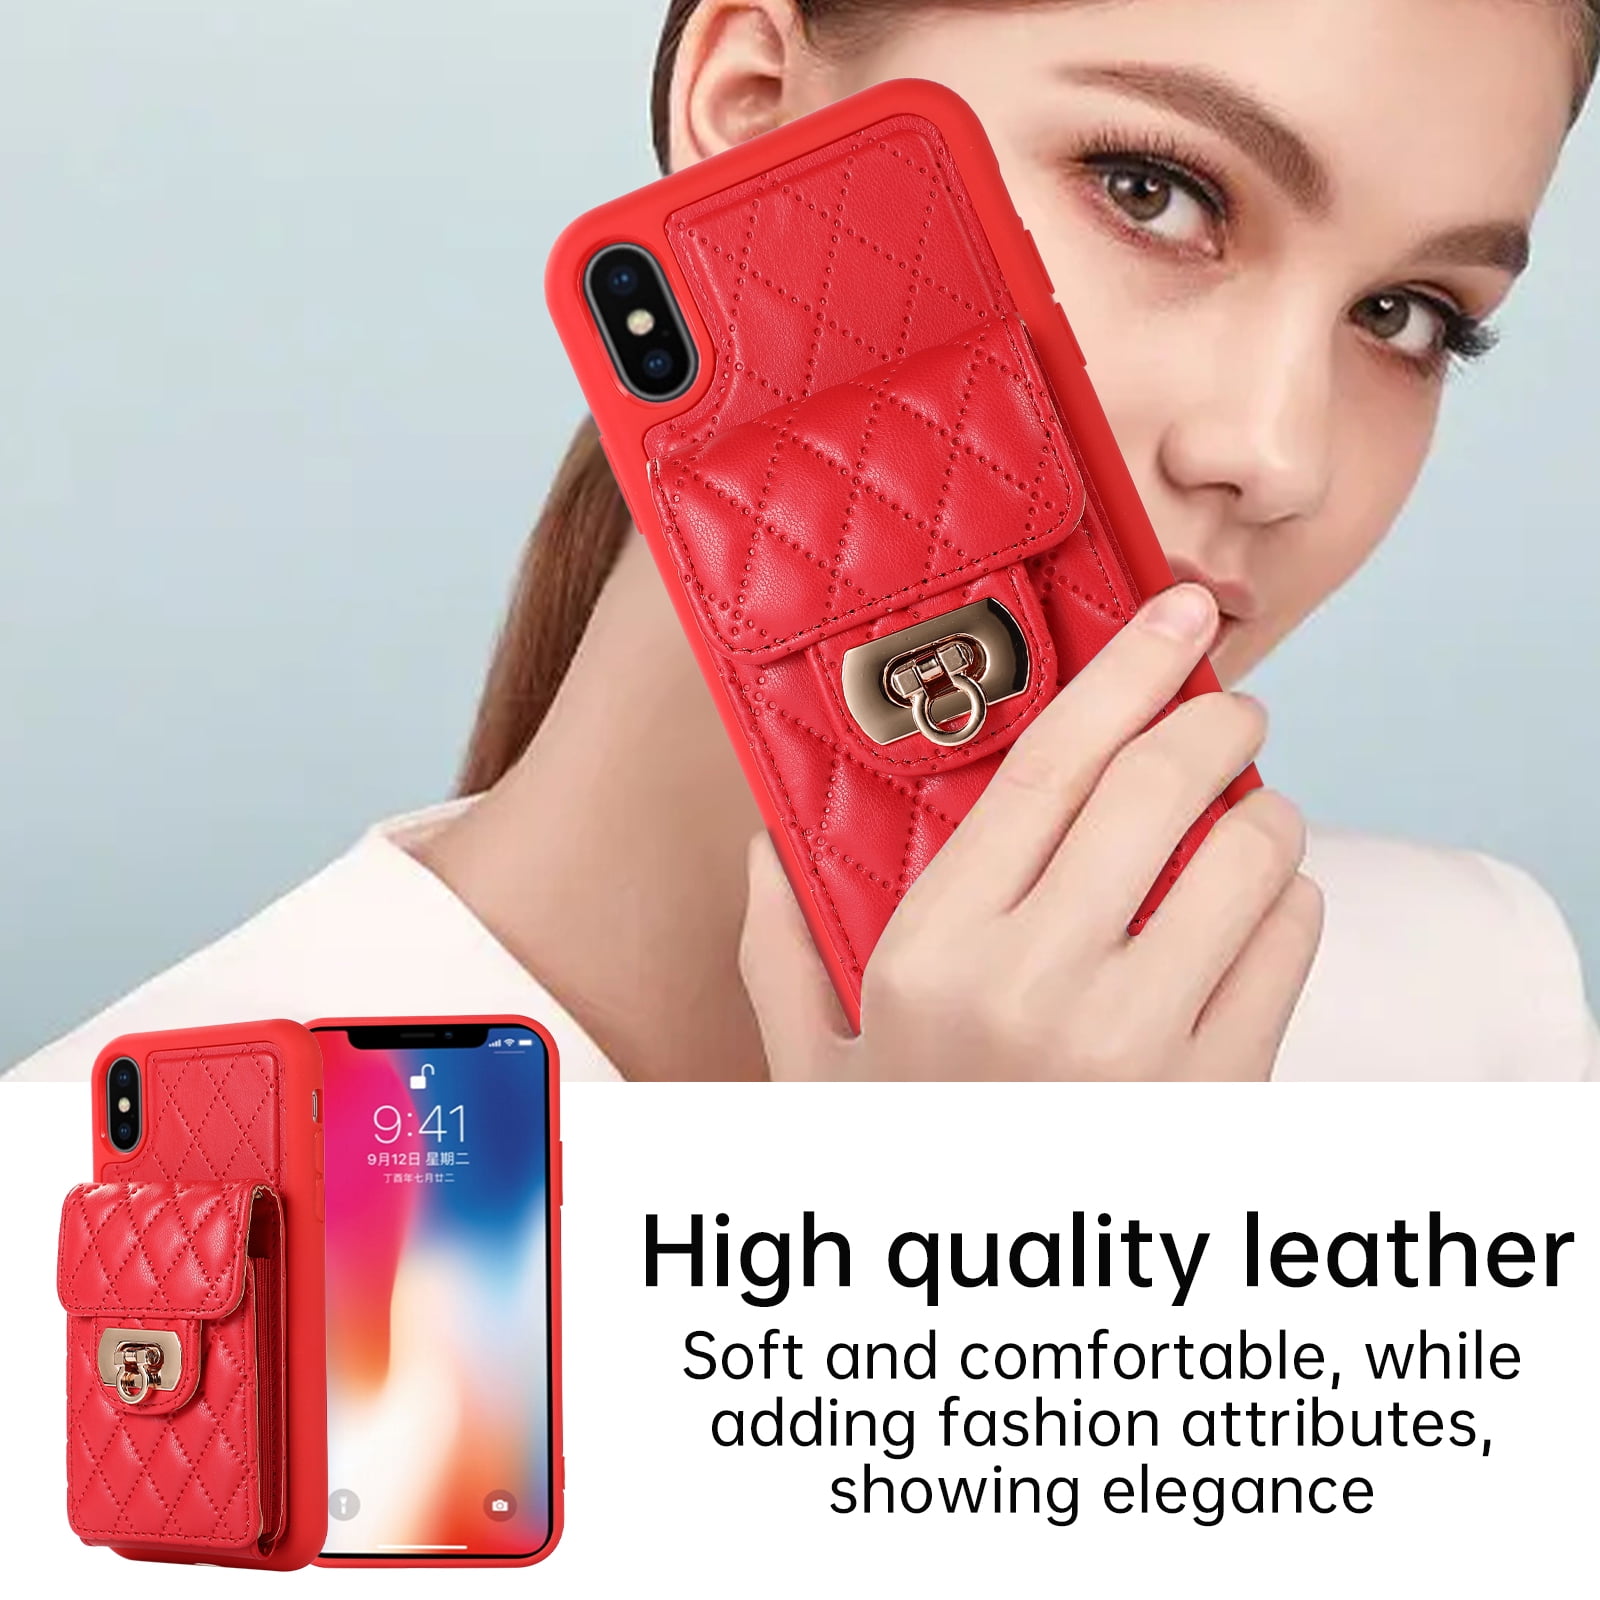 Nalacover Crossbody Wallet Case for iPhone XS, iPhone X, [6 Card